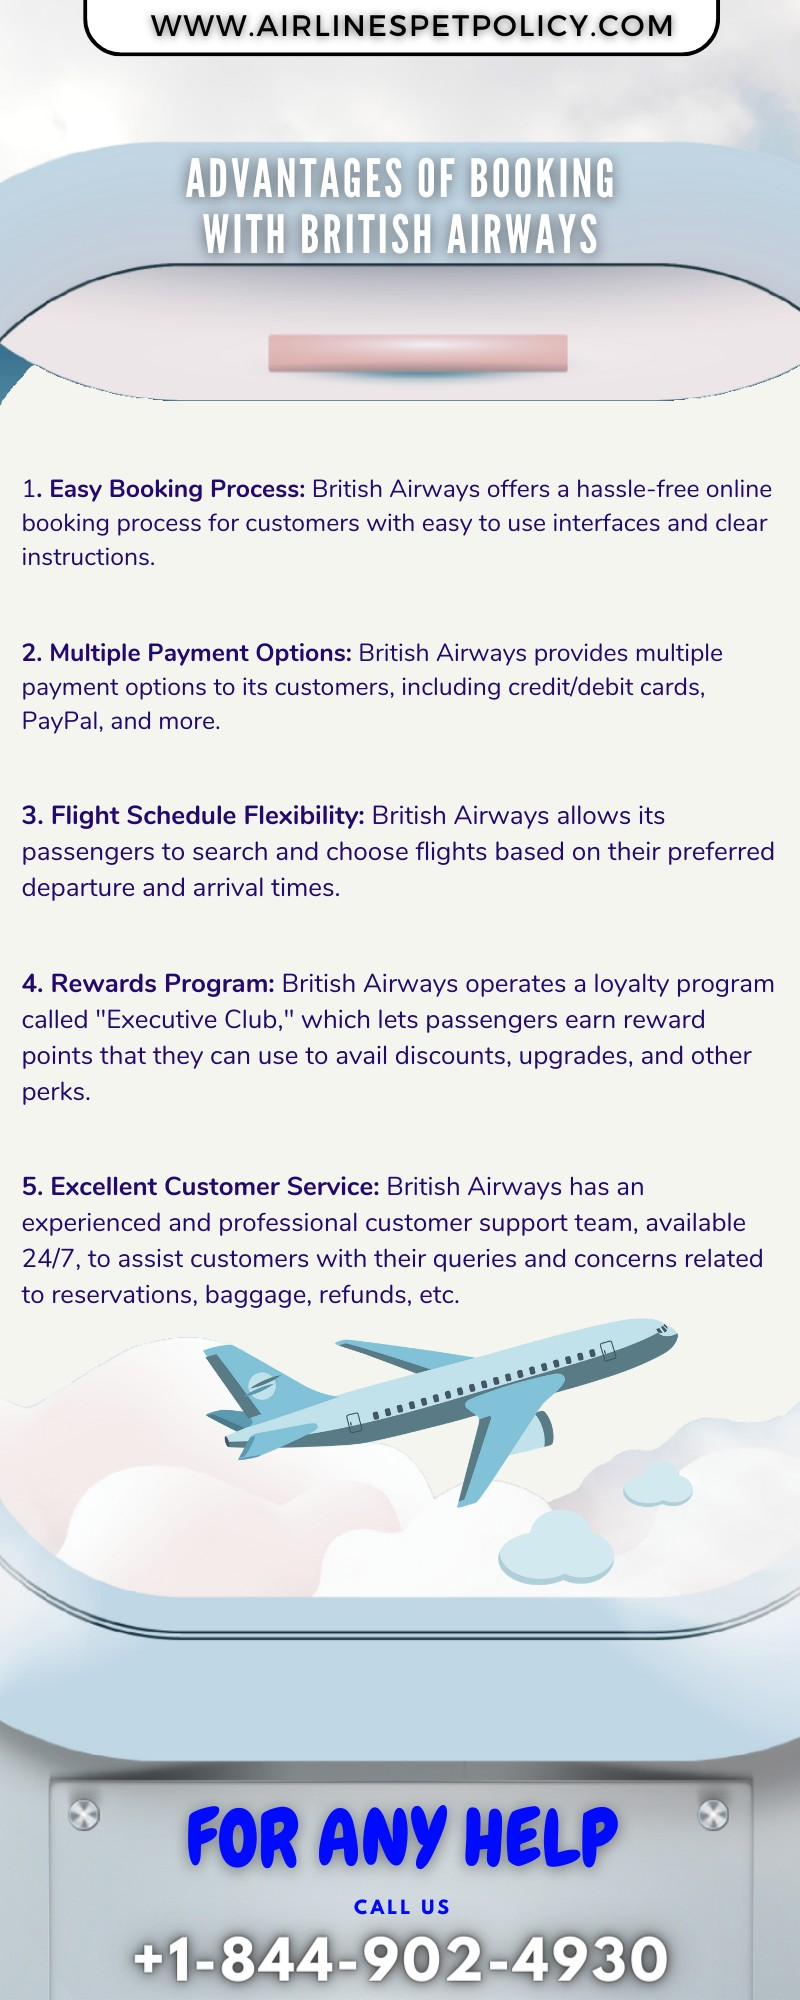 Advantages of Booking with British Airways